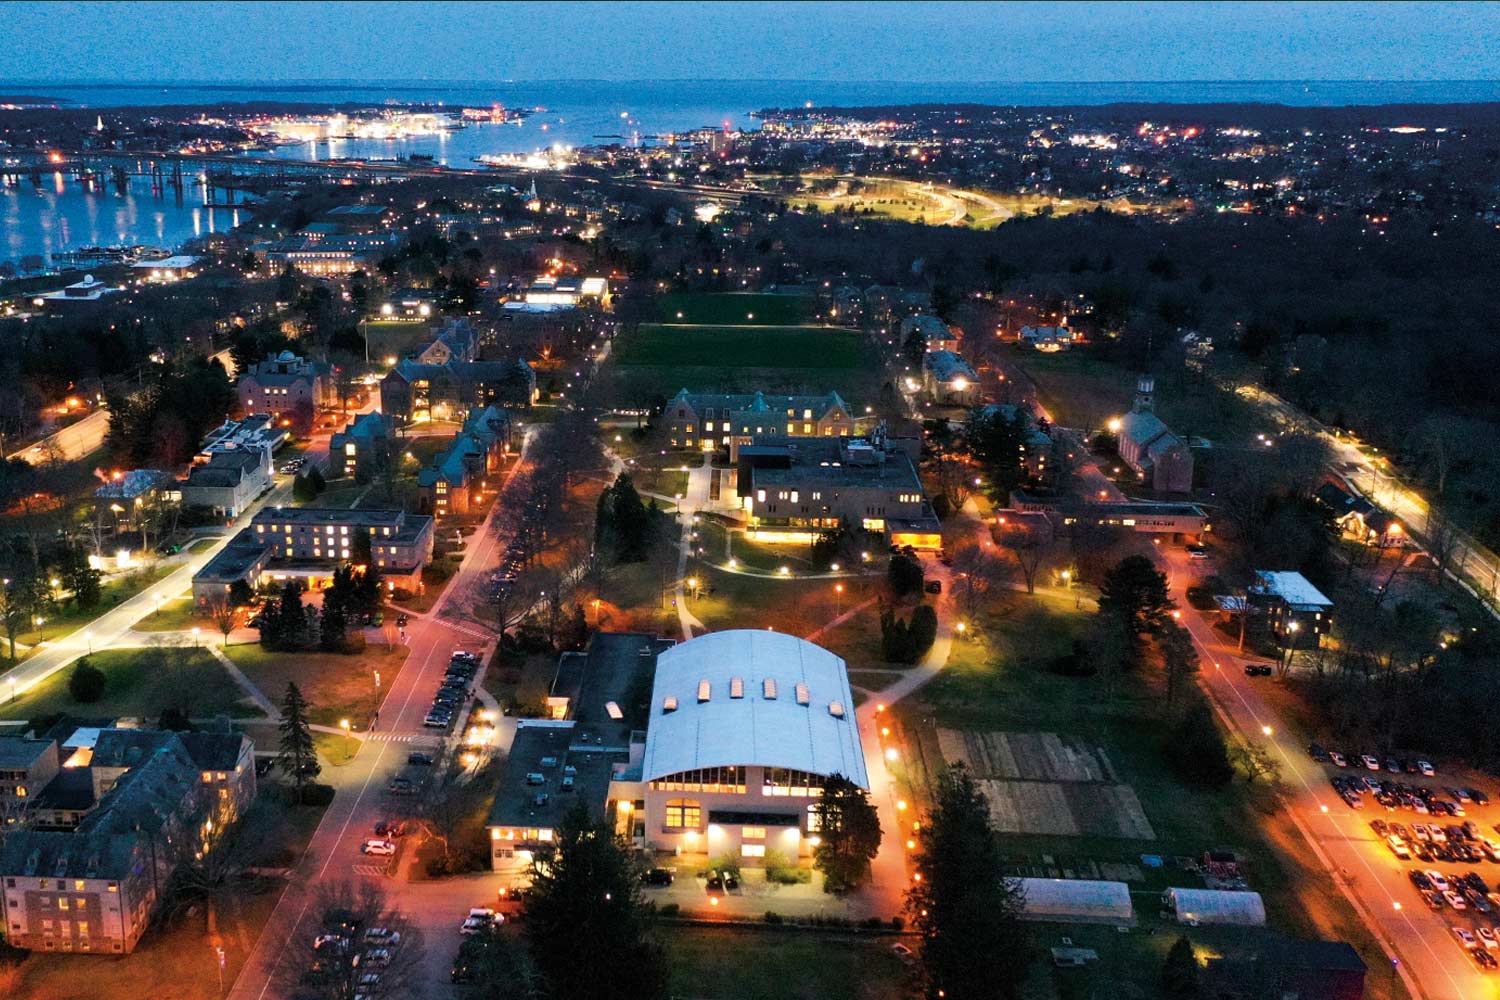 Drone image of the campus at night